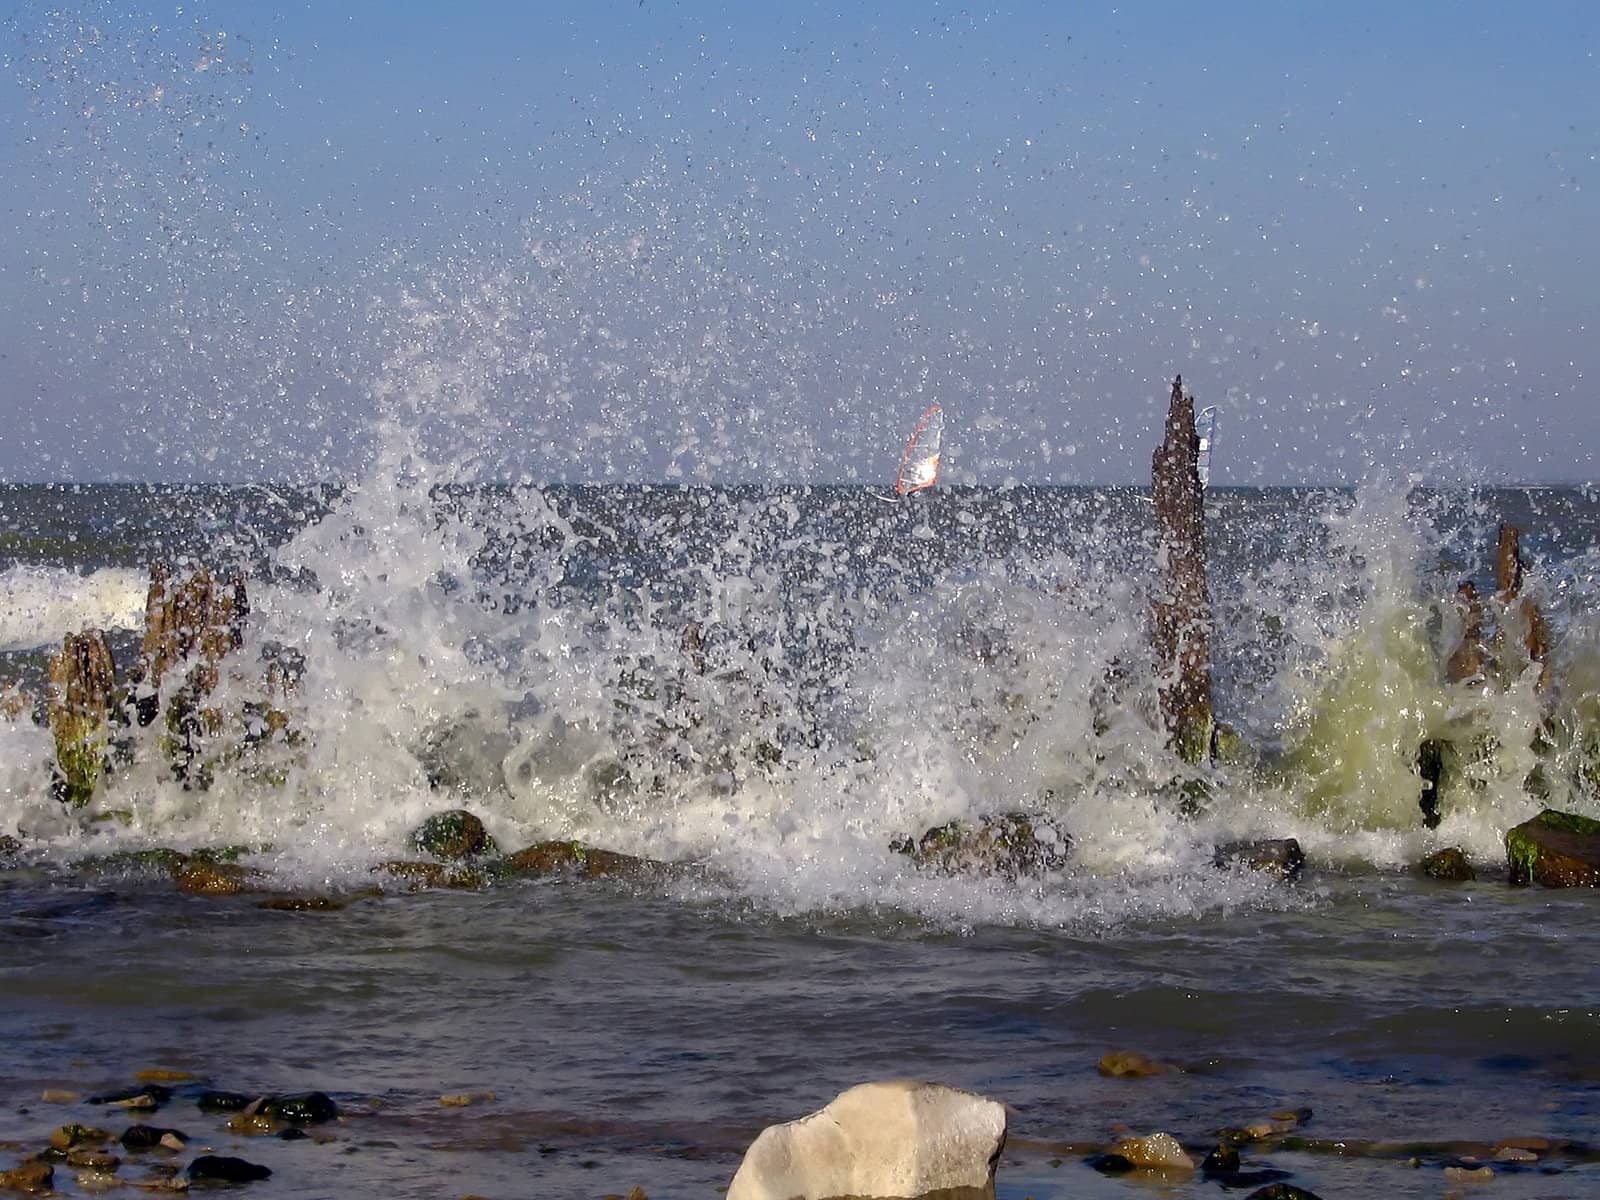 Waves, splashes and the old wooden breakwater